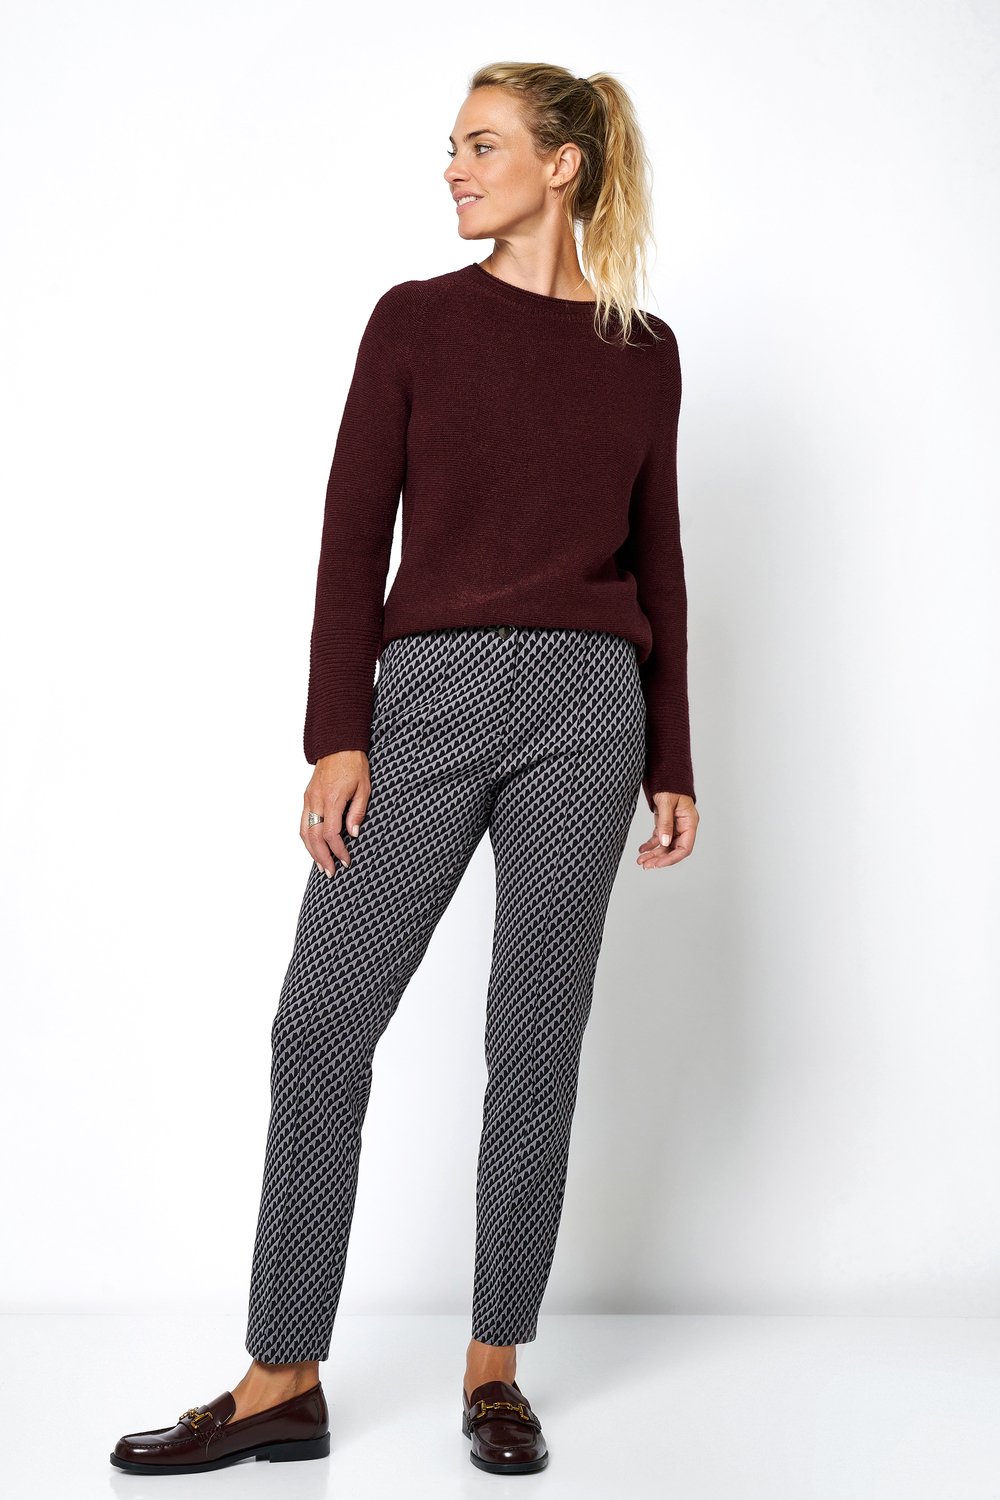 Patterned business trousers | Style »Alessa« grey/black